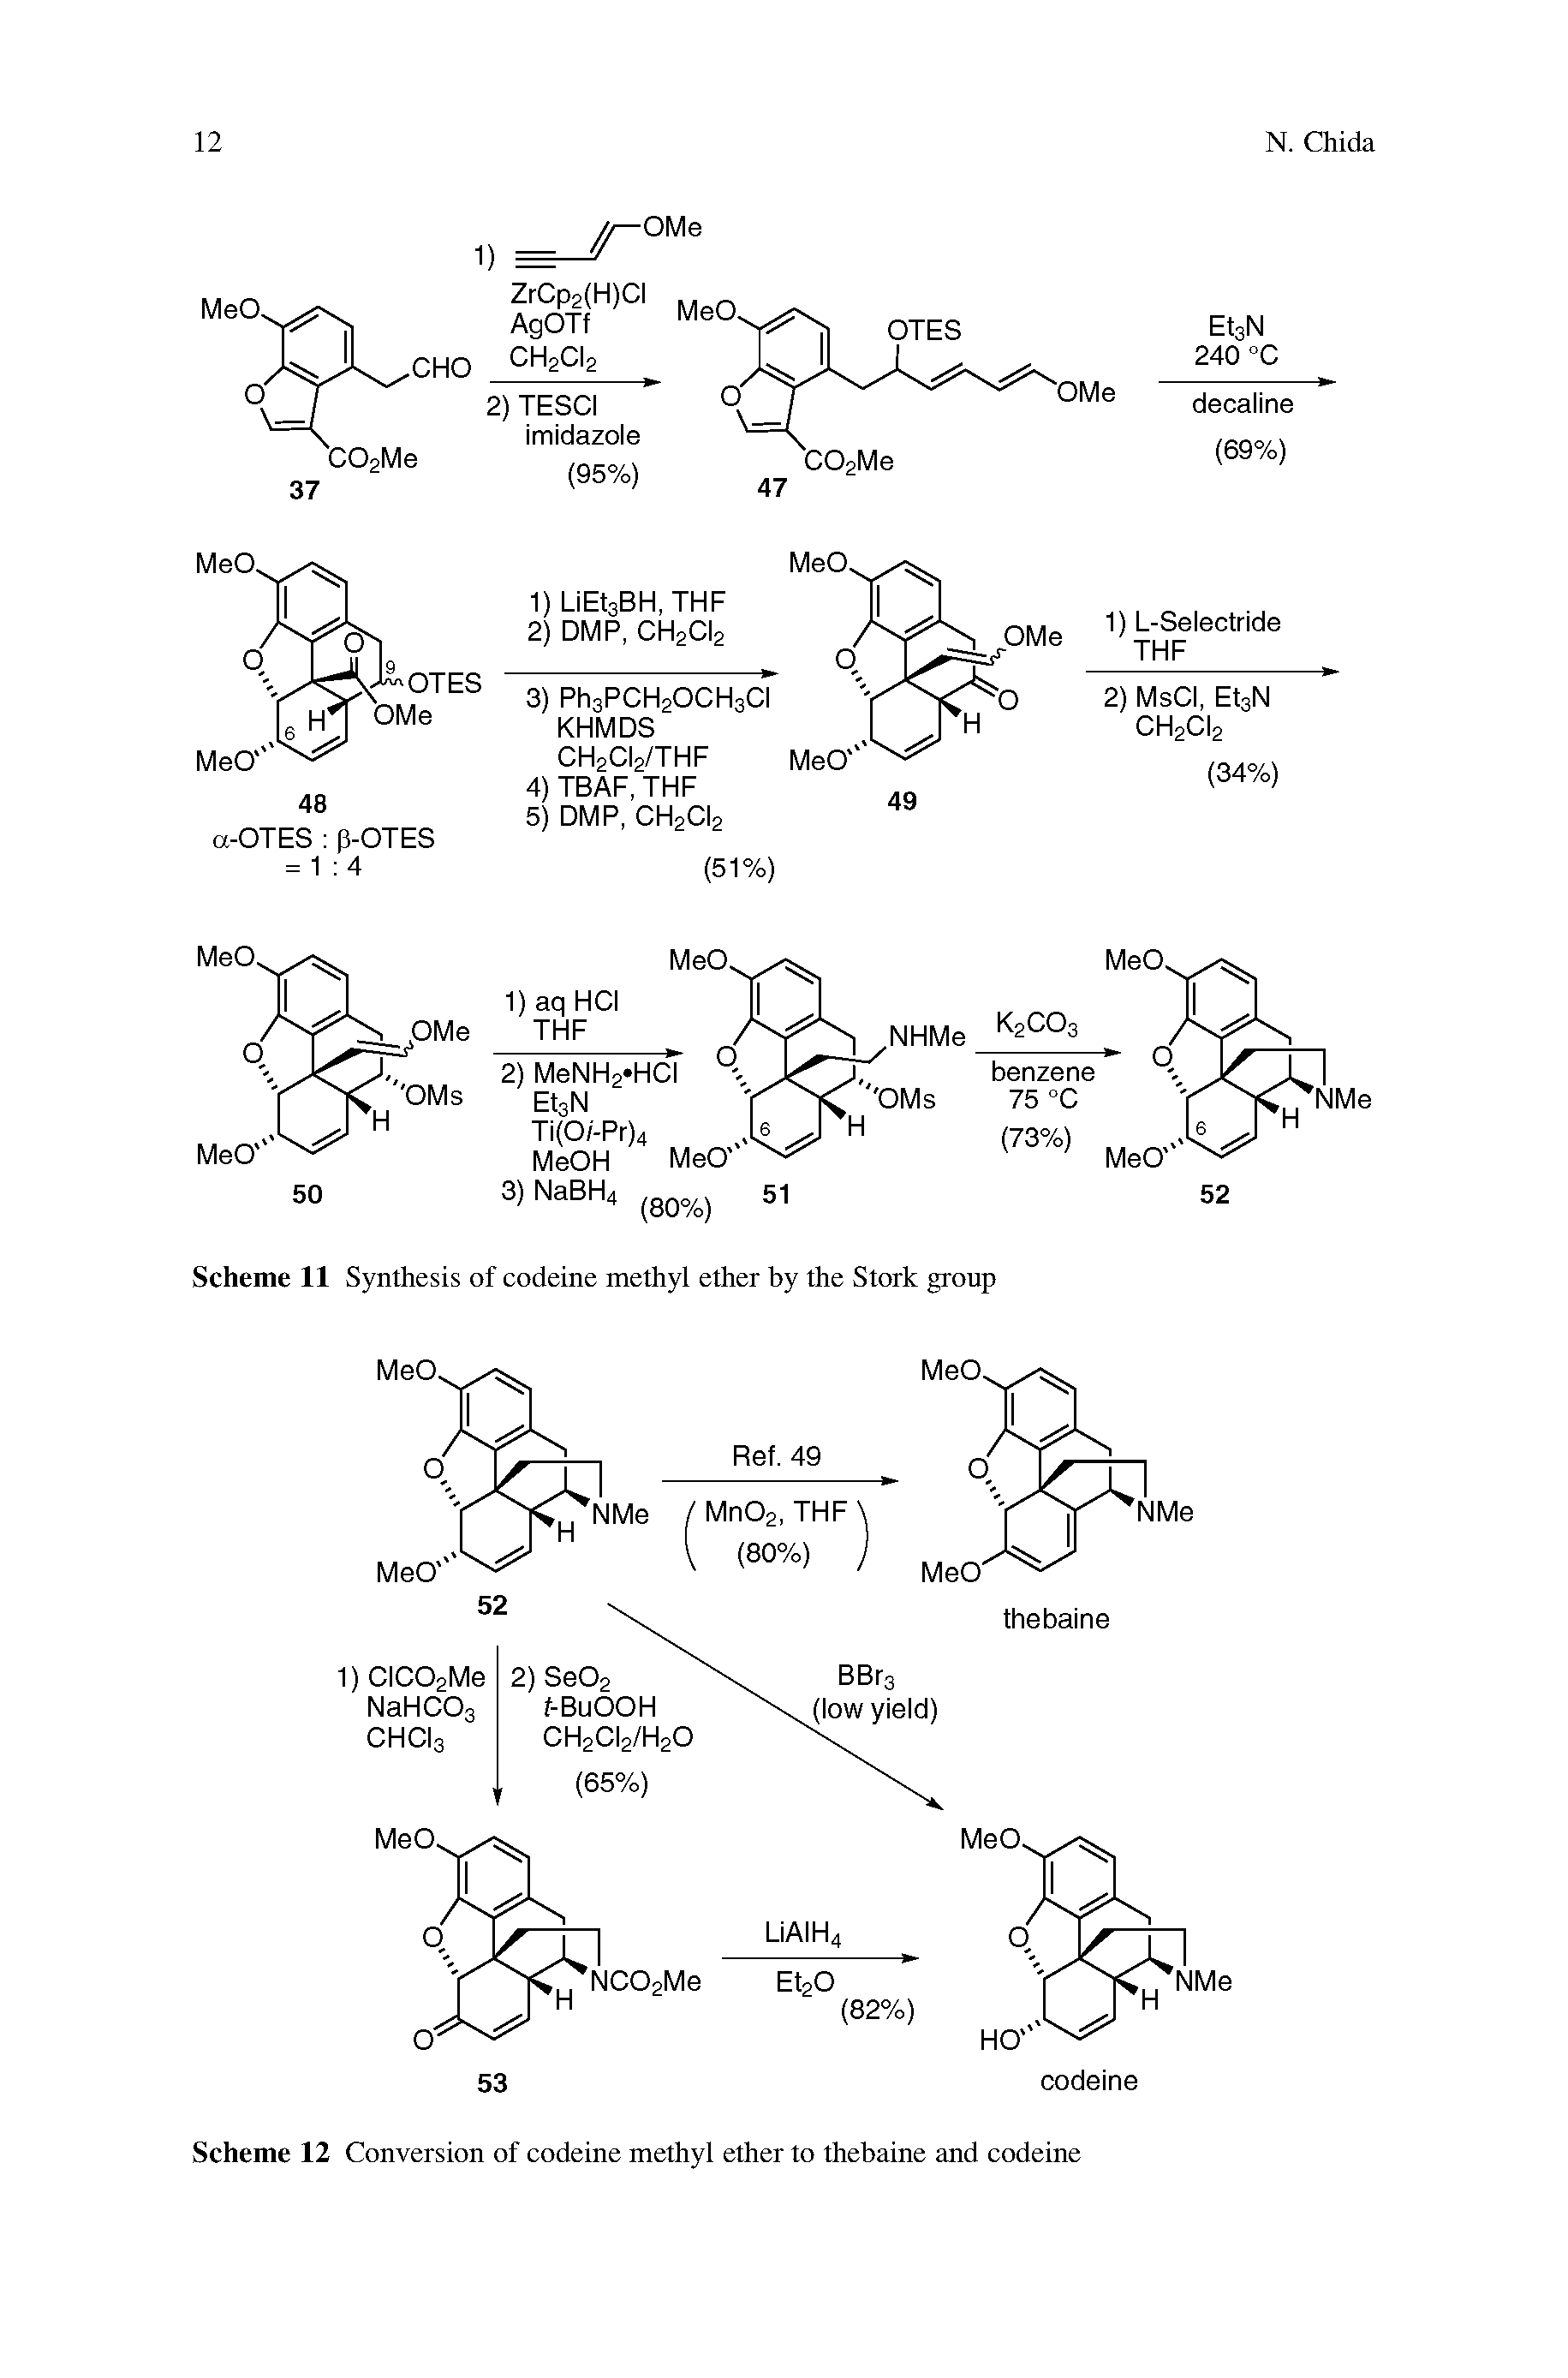 Scheme 11 Synthesis of codeine methyl ether by the Stork group...